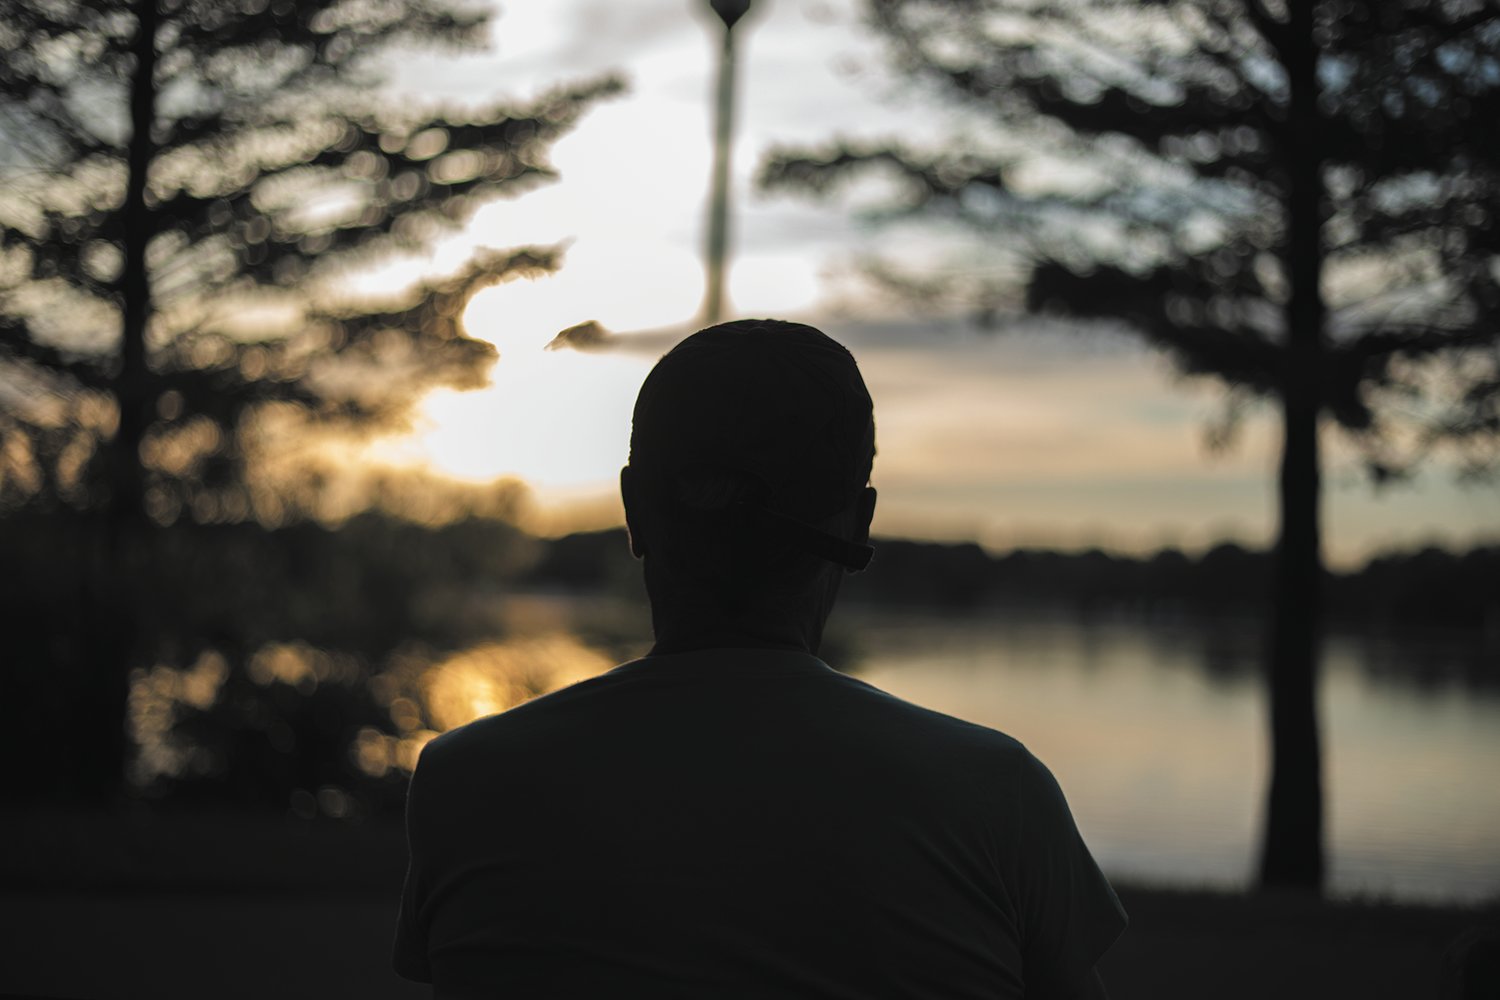 Kevin Morgel rests on a bench along Lake Nokomis, observing the sunset. “I have three goals: try to exercise everyday, to take at least one picture of the sunset, and to do a little writing. I am enjoying the evening,” he said.

>> Photo series 
by Vanna Contreras